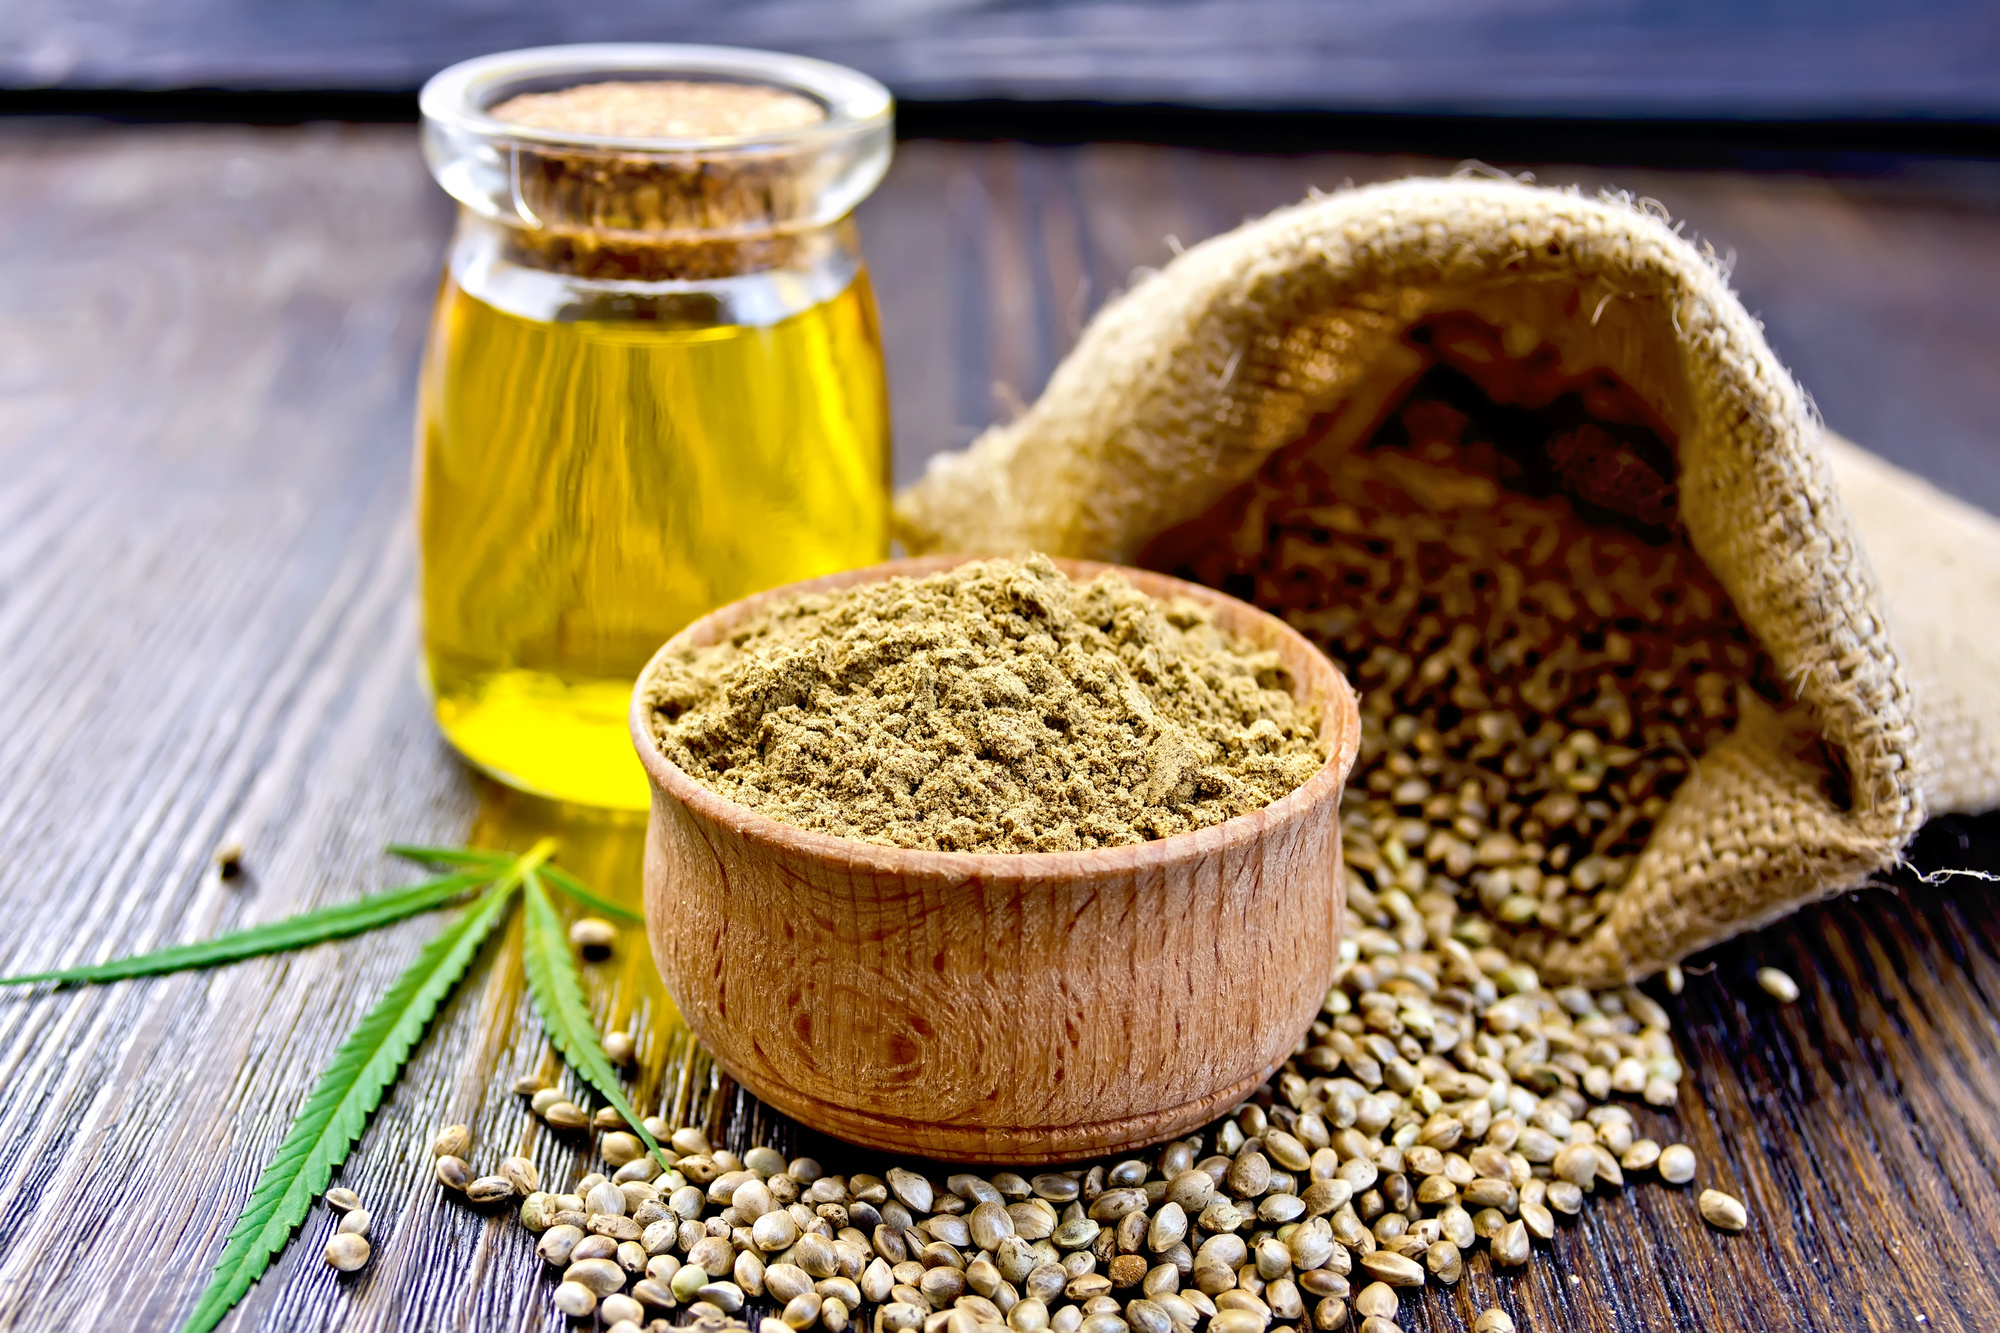 What Are The Benefits Of Hemp Oil?